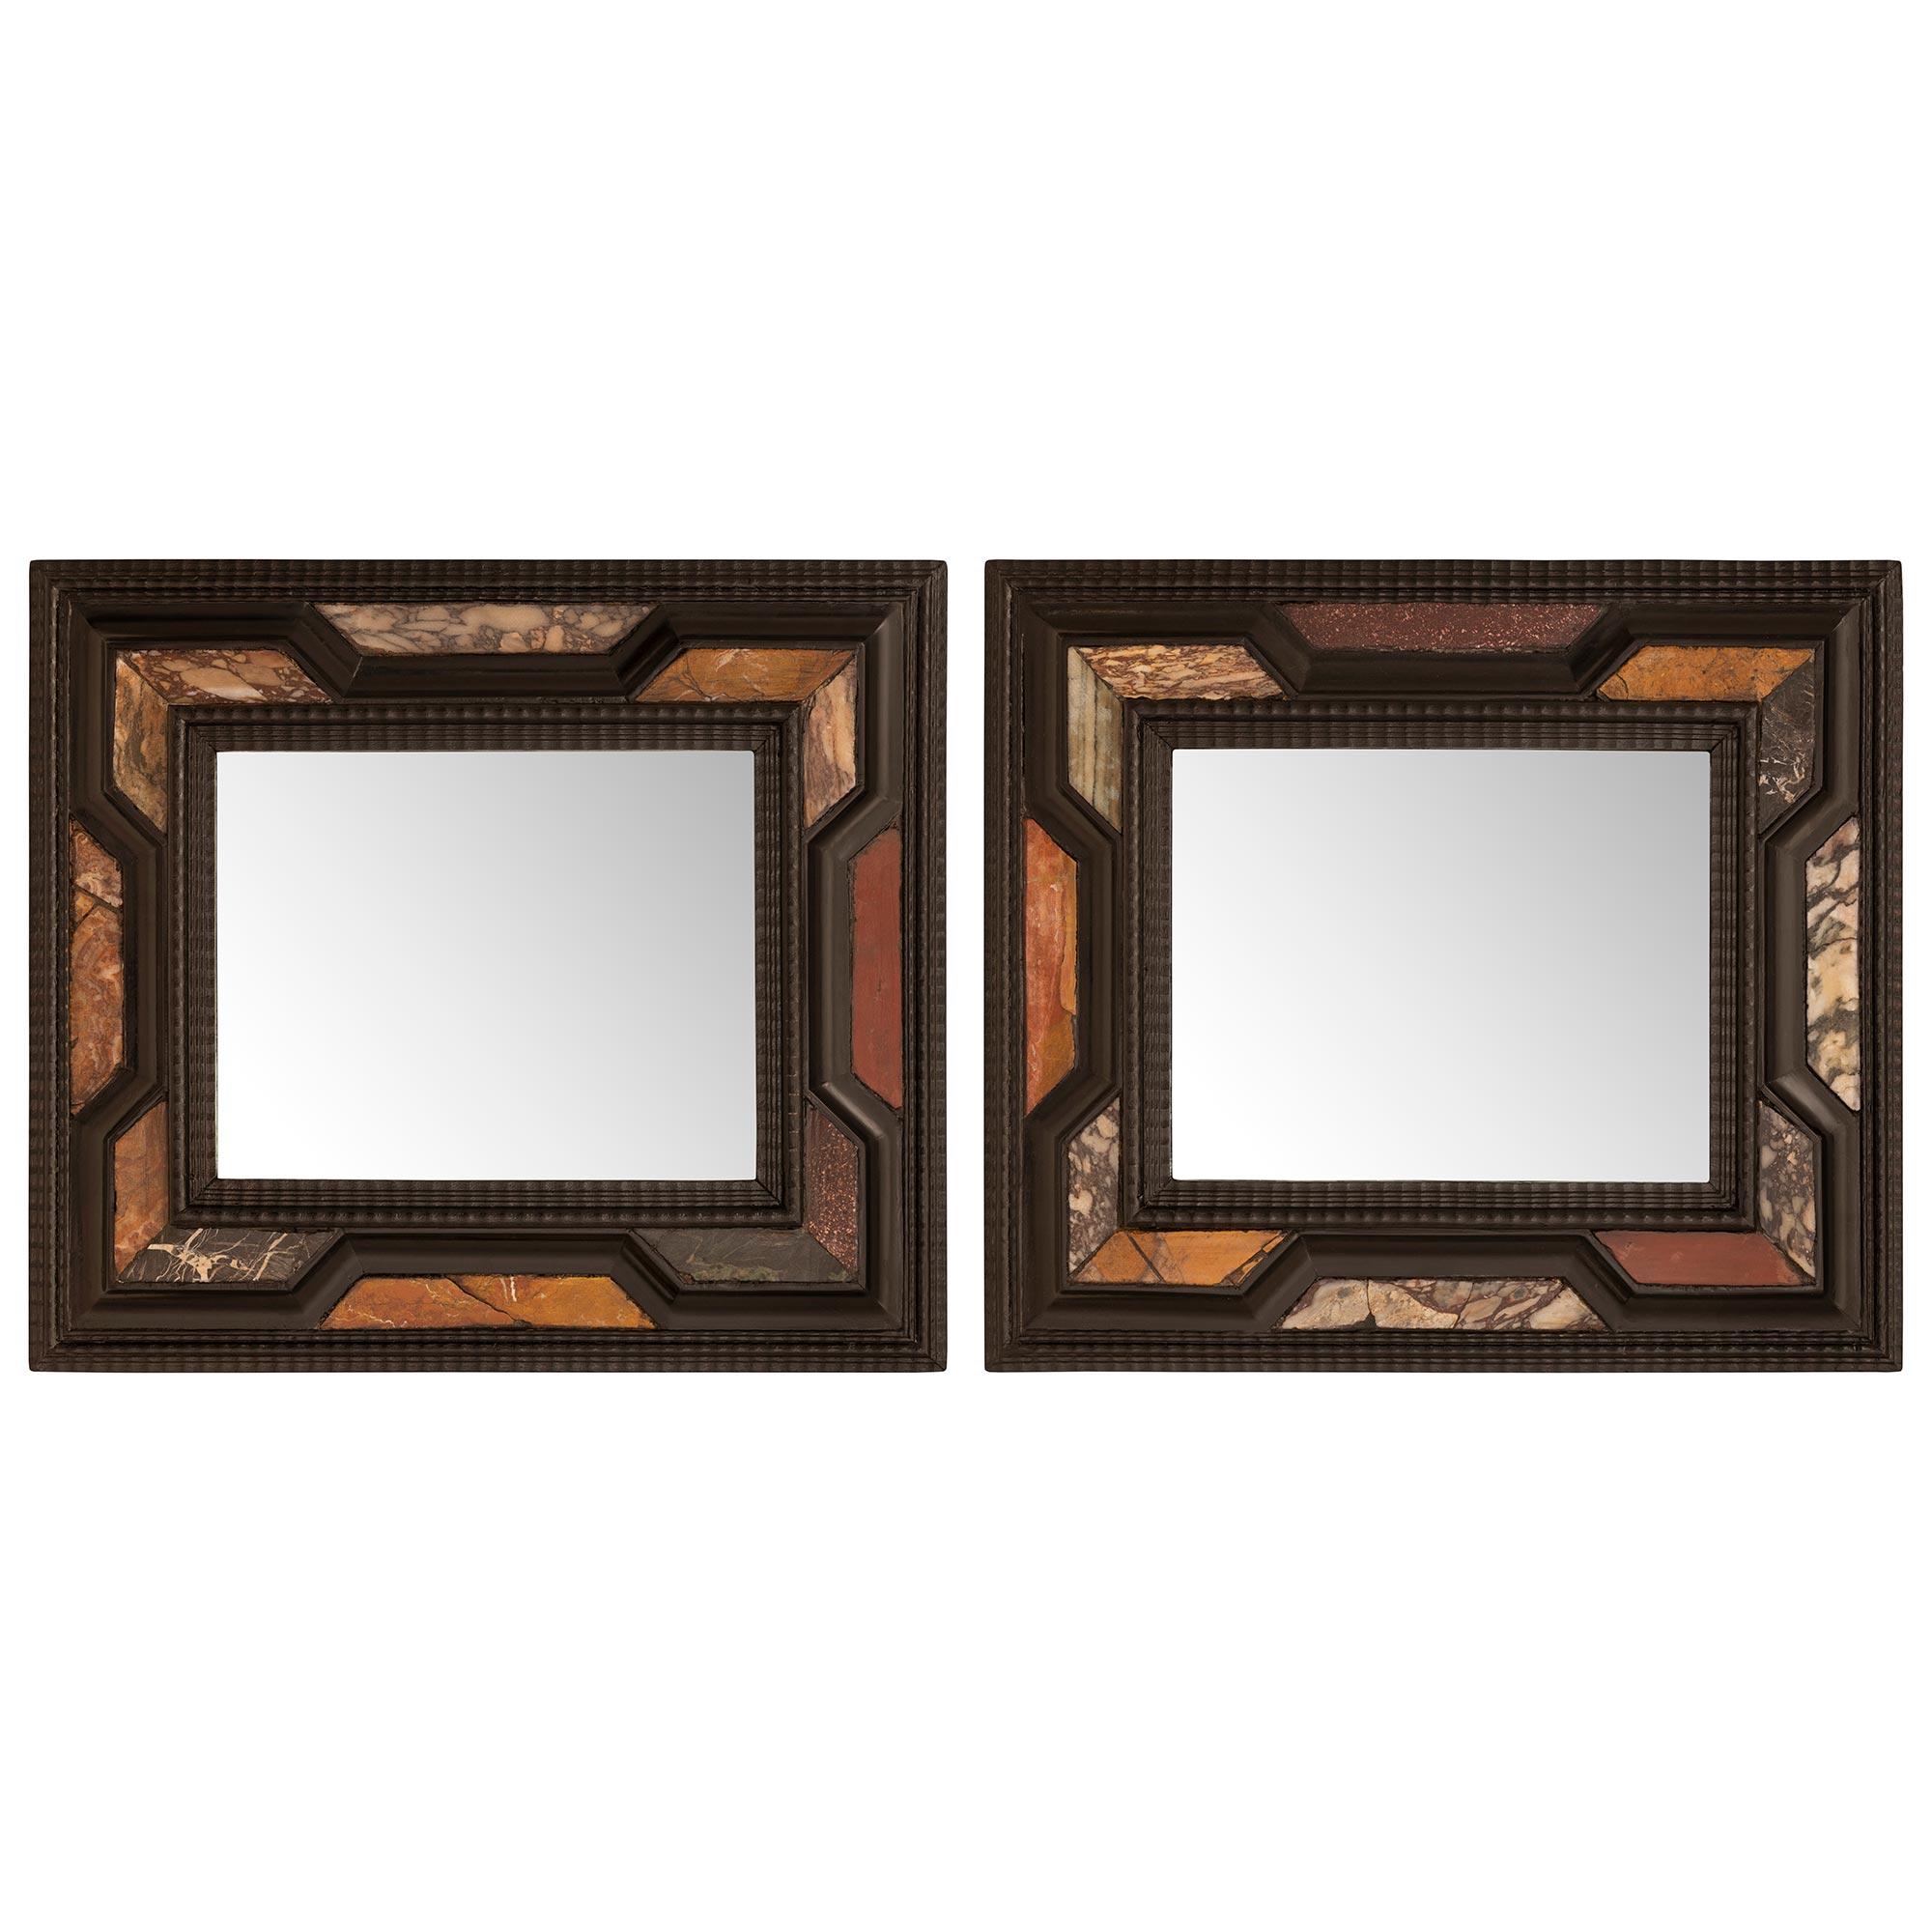 An exceptional pair of Italian 19th century Florentine st. ebonized Fruitwood and marble mirrors. Each mirror retains their original mirror plates framed within a most decorative mottled wrap around band with exceptional wave like designs. The outer